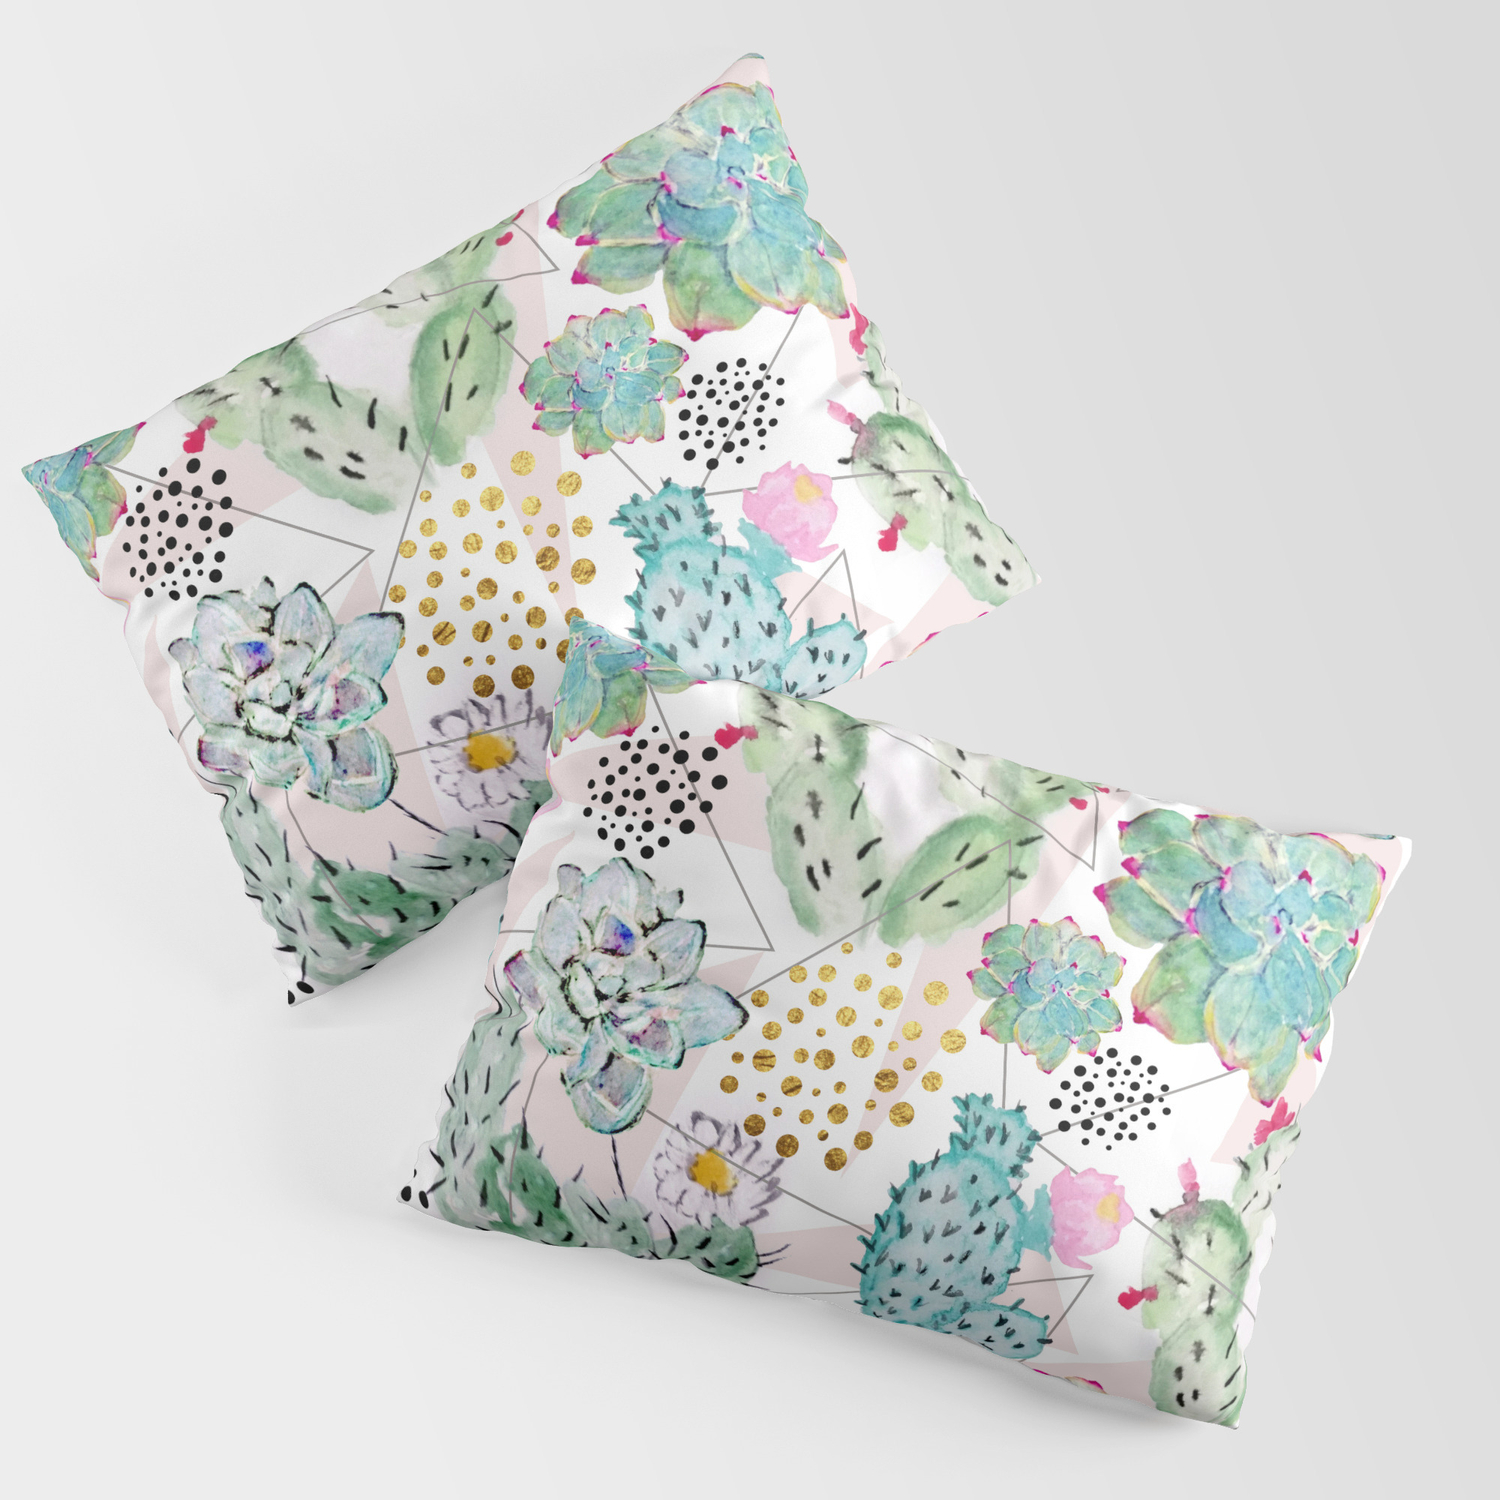 Society6 Pretty Watercolor Hand Paint Floral Artwork Standard Set of 2 Cotton by Inovarts on Pillow Sham 